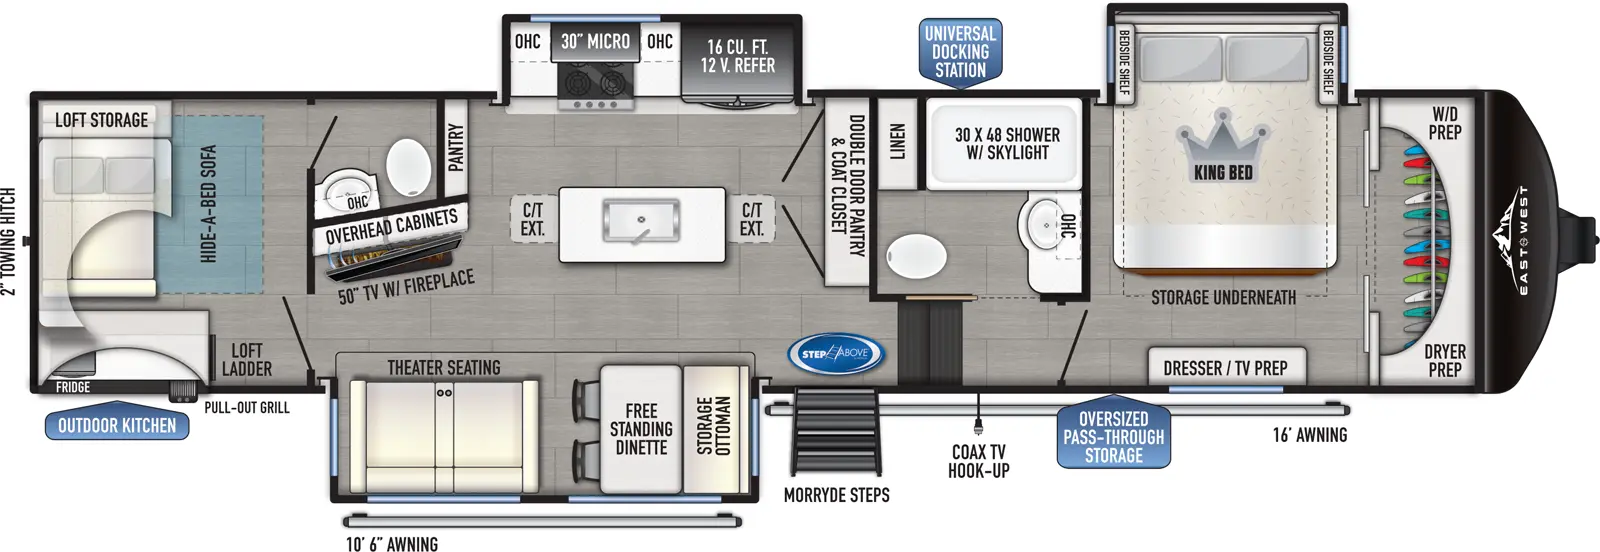 The 375BH-OK has 3 slideouts and one entry. Exterior features an oversized pass through storage, universal docking station, MORryde steps, coax TV hookup, 10 foot 6 inch awning and 16 foot awning, outdoor kitchen with pull-out grill and refrigerator, and 2 inch towing hitch. Interior layout front to back: front closet with washer/dryer prep, off-door side king bed slideout with storage underneath, and door side dresser with TV prep; off-door side full bathroom with overhead cabinet, linen closet, and shower with skylight; steps down to main living area and entry; double door pantry and coat closet along inner wall; off-door side slideout with 12V refrigerator, overhead cabinet, microwave, and cooktop, and pantry along inner wall; kitchen island with sink and extensions; door side slideout with free-standing dinette with storage ottoman, and theater seating; angled inner wall with overhead cabinets and TV with fireplace; rear bunk room with half bathroom and loft bed and storage above rear hide-a-bed sofa.